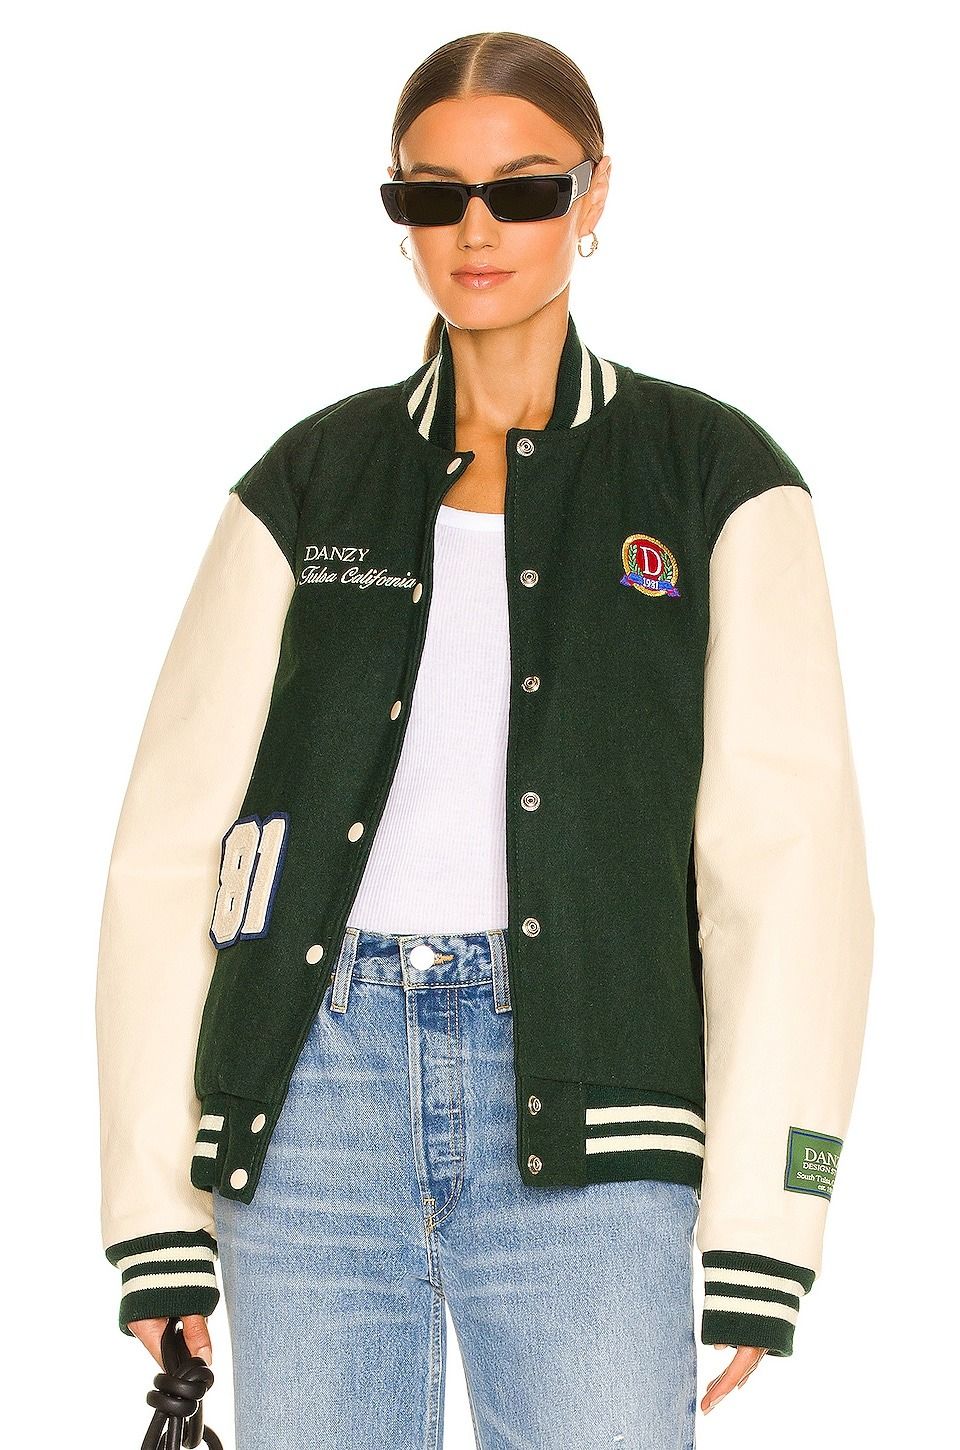 29 Varsity Jackets That Prove You Need One for Yourself | Who What Wear